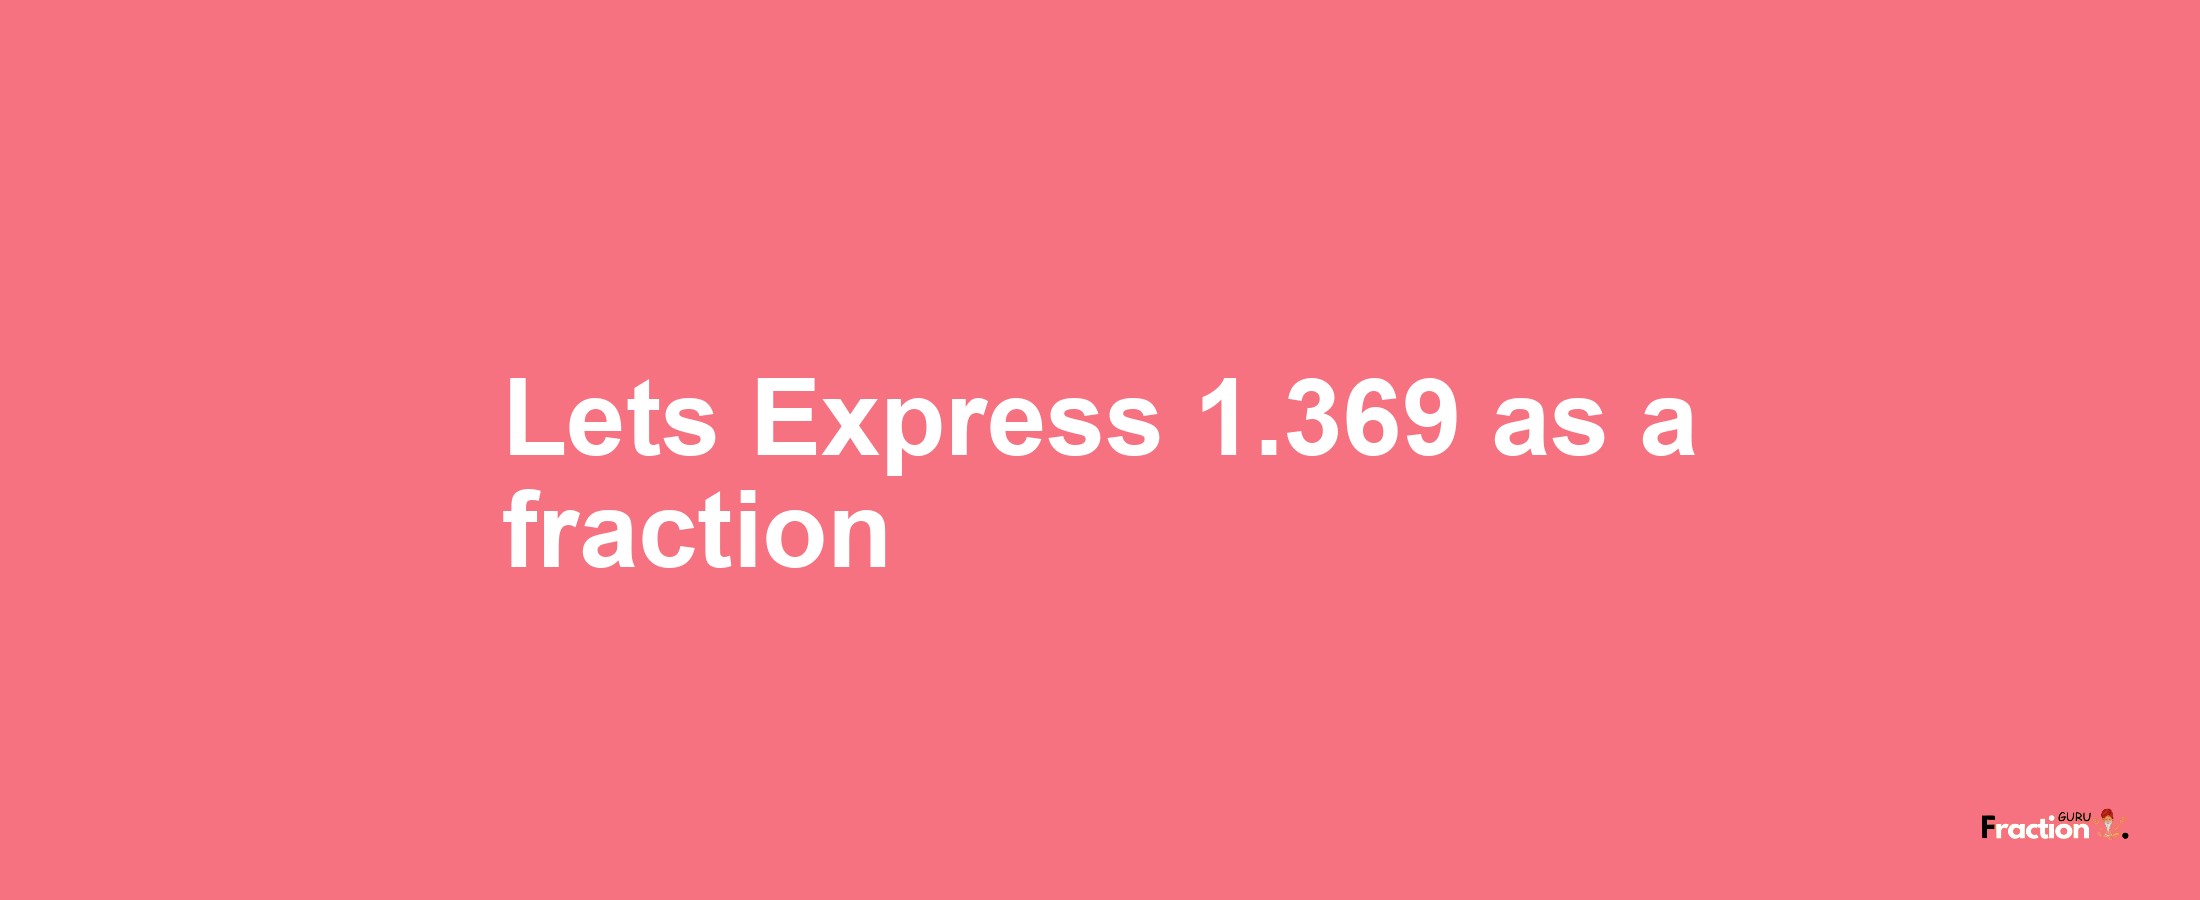 Lets Express 1.369 as afraction